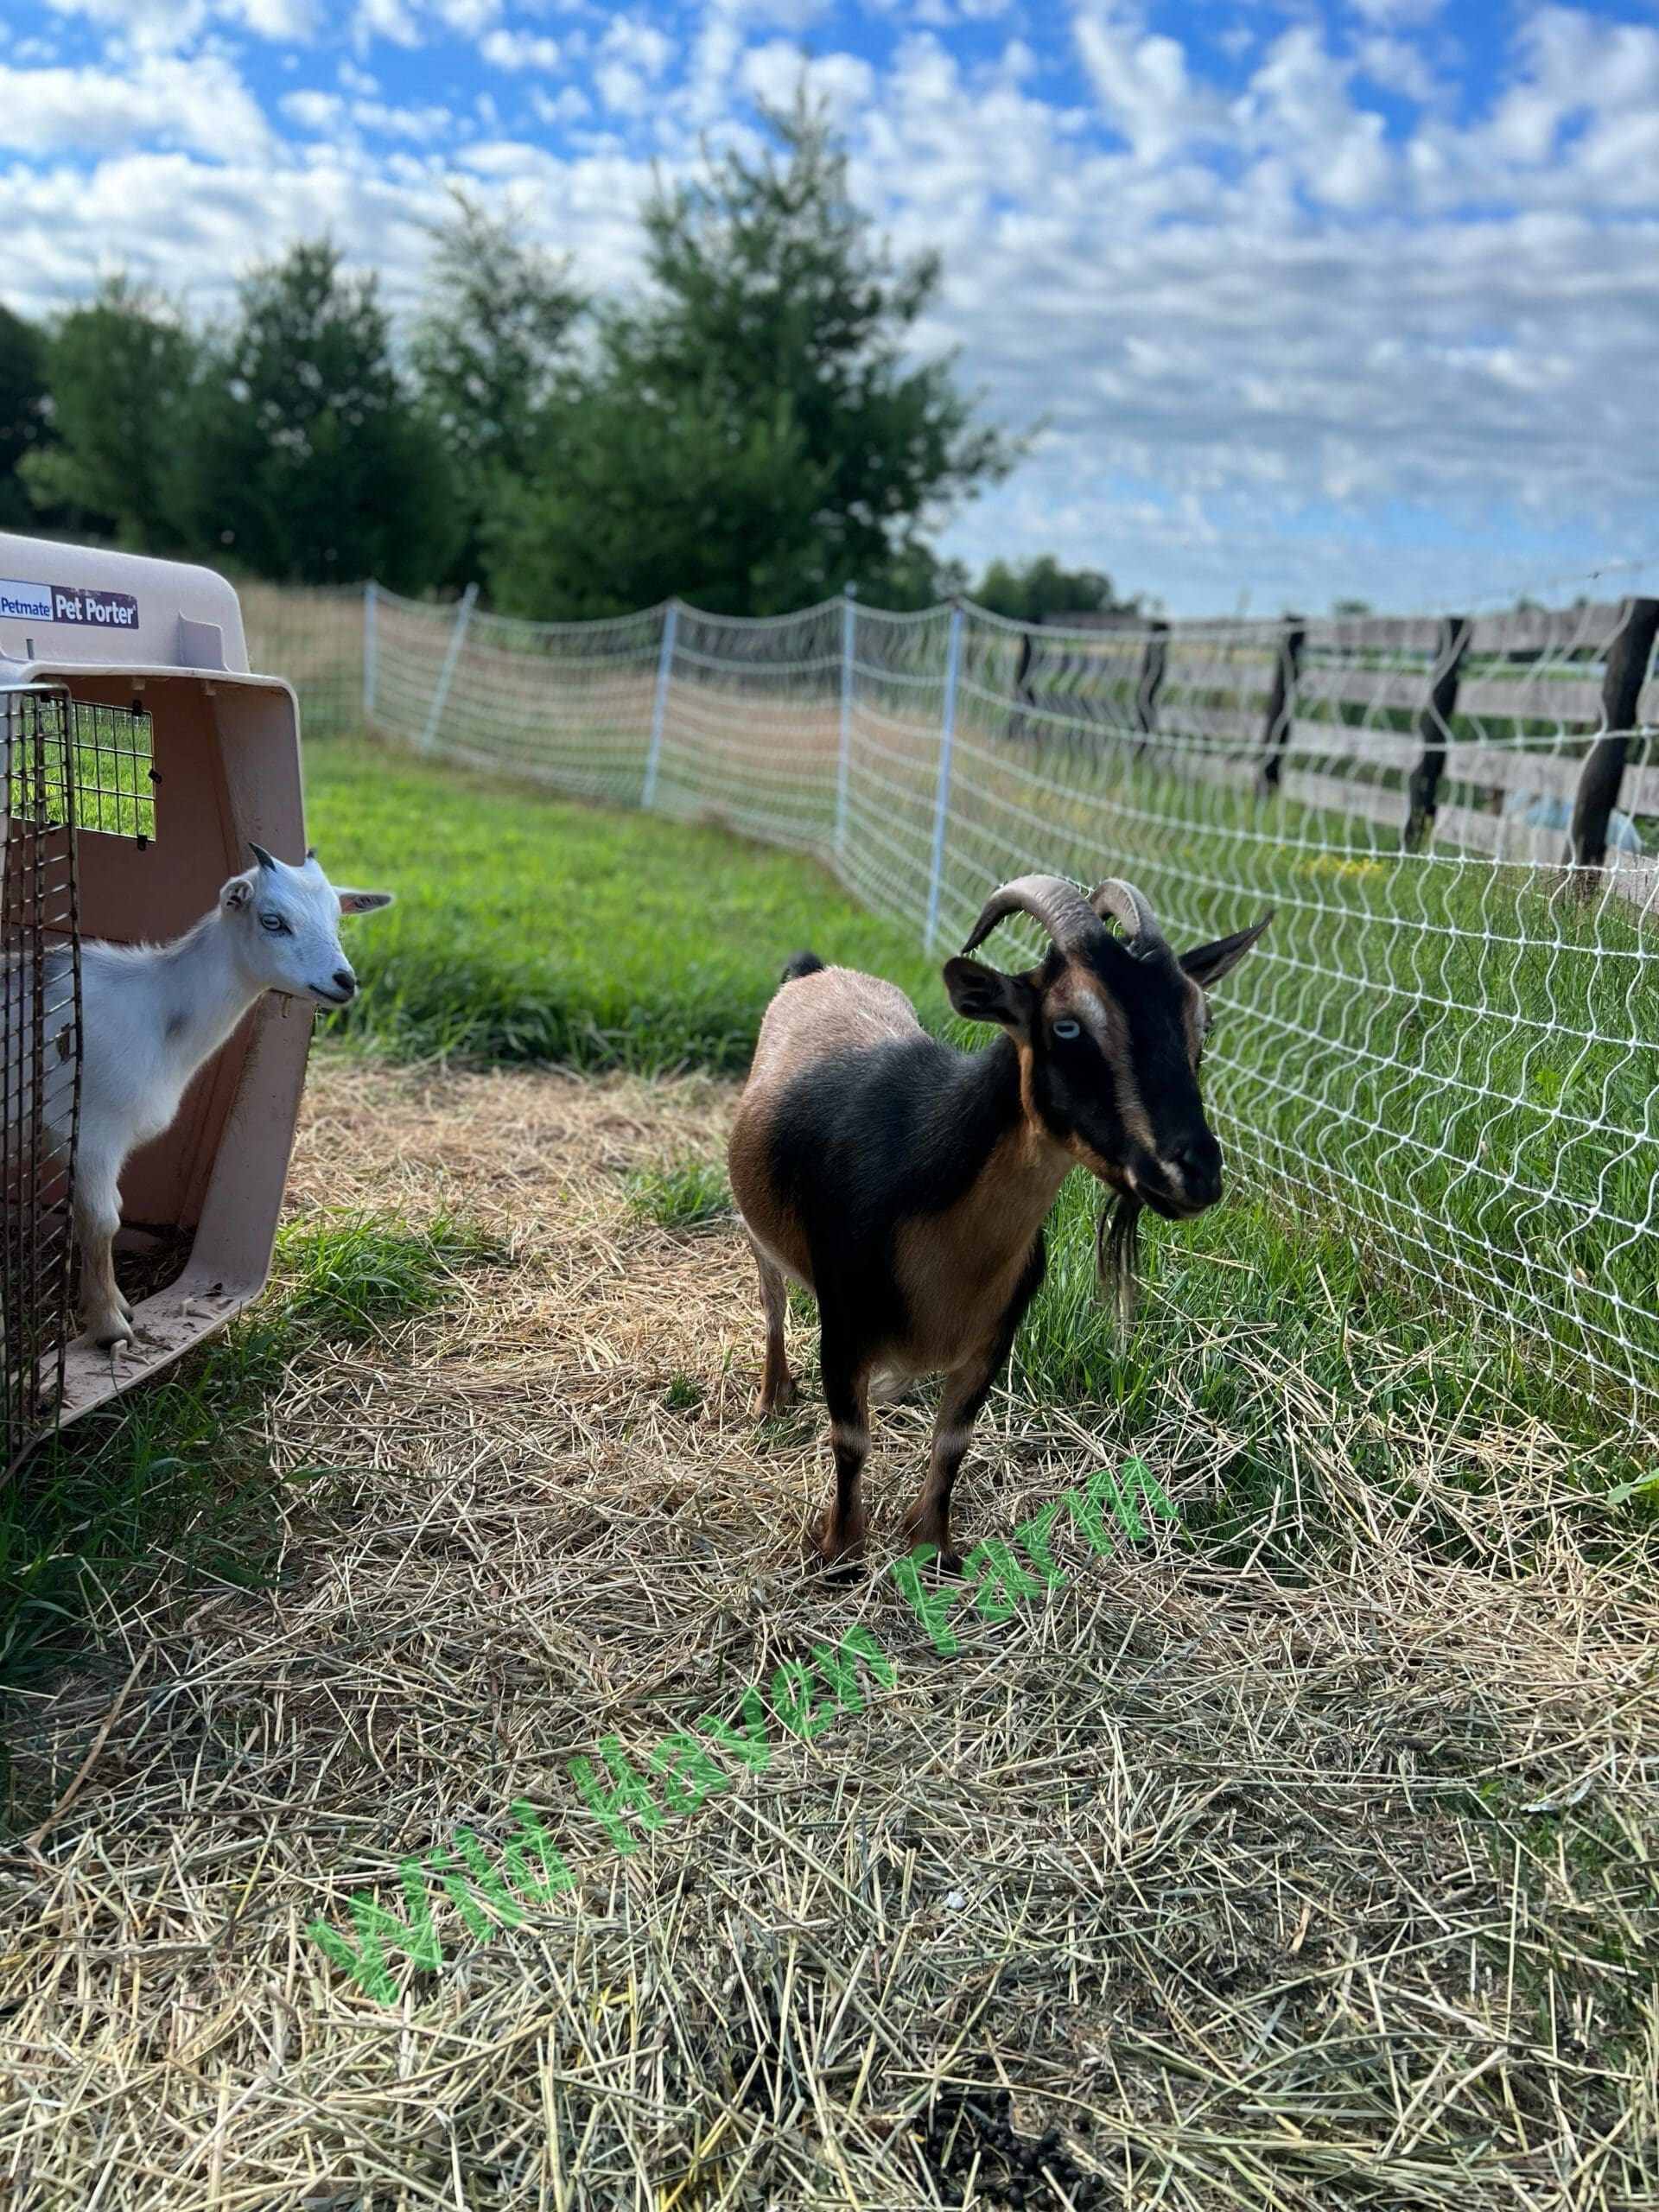 Two goats in front of an electric fence